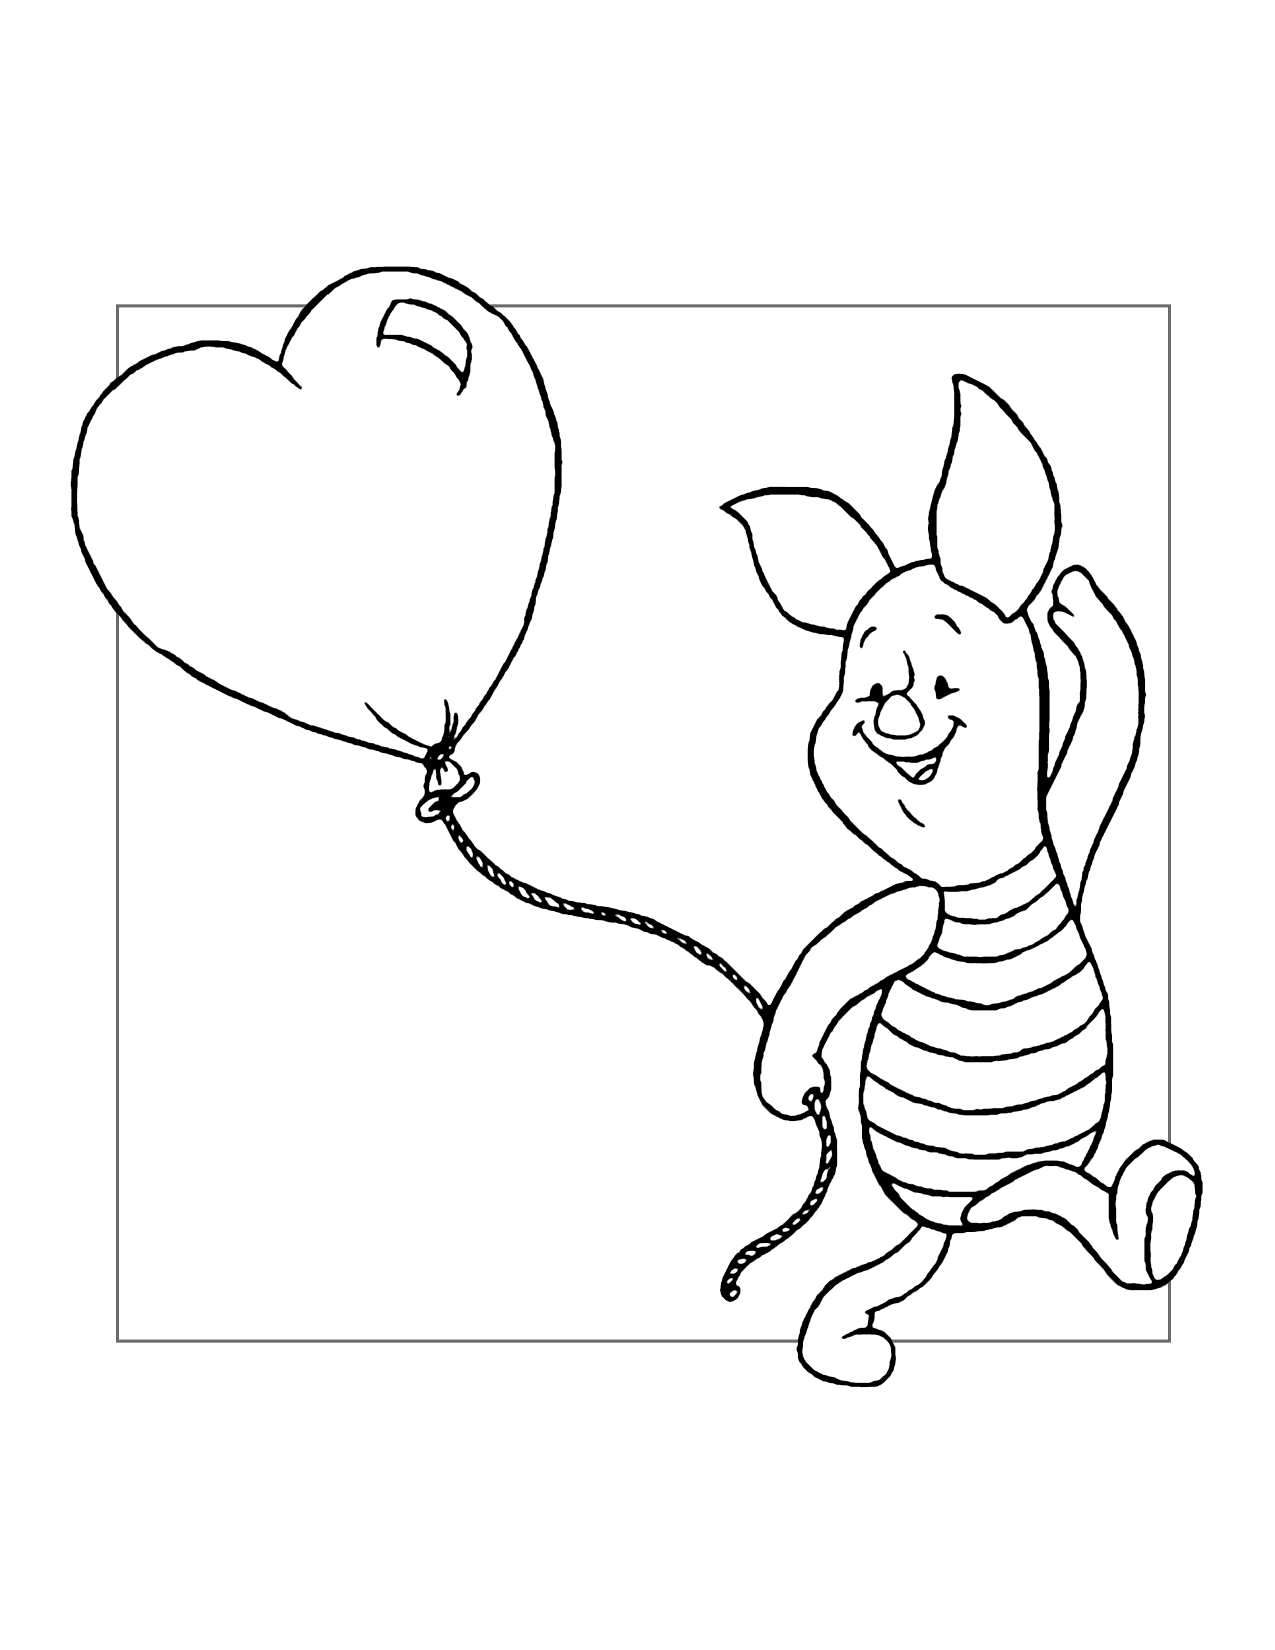 Piglets Got A Heart Coloring Page